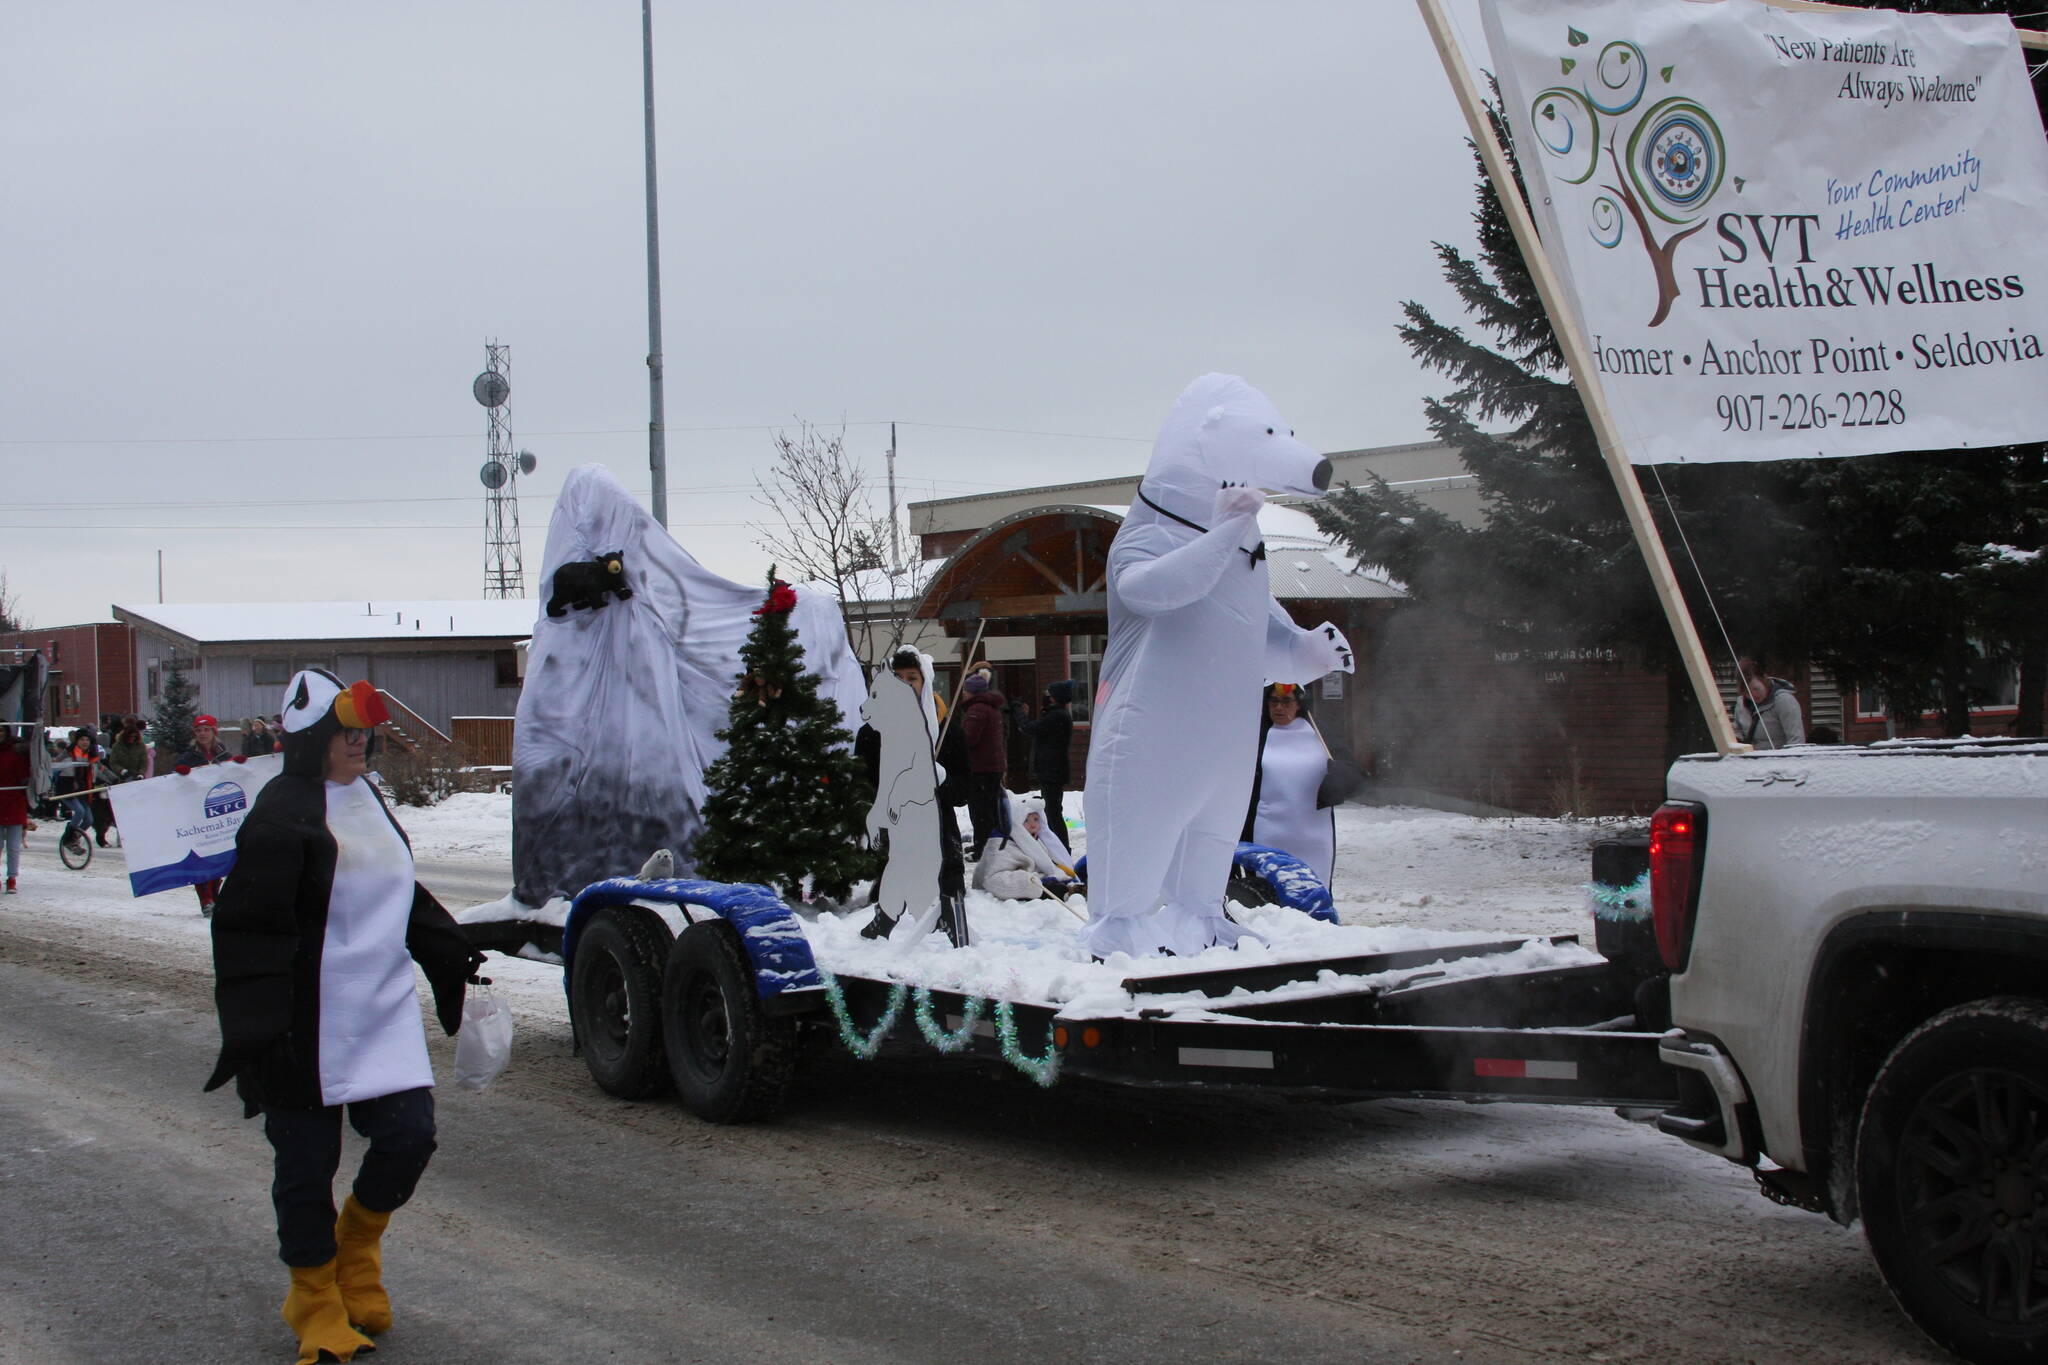 The SVT float makes its way down Pioneer Avenue in the 69th Annual Winter Carnival Parade on Saturday, Feb. 11, 2023 in Homer, Alaska. Photo by Delcenia Cosman